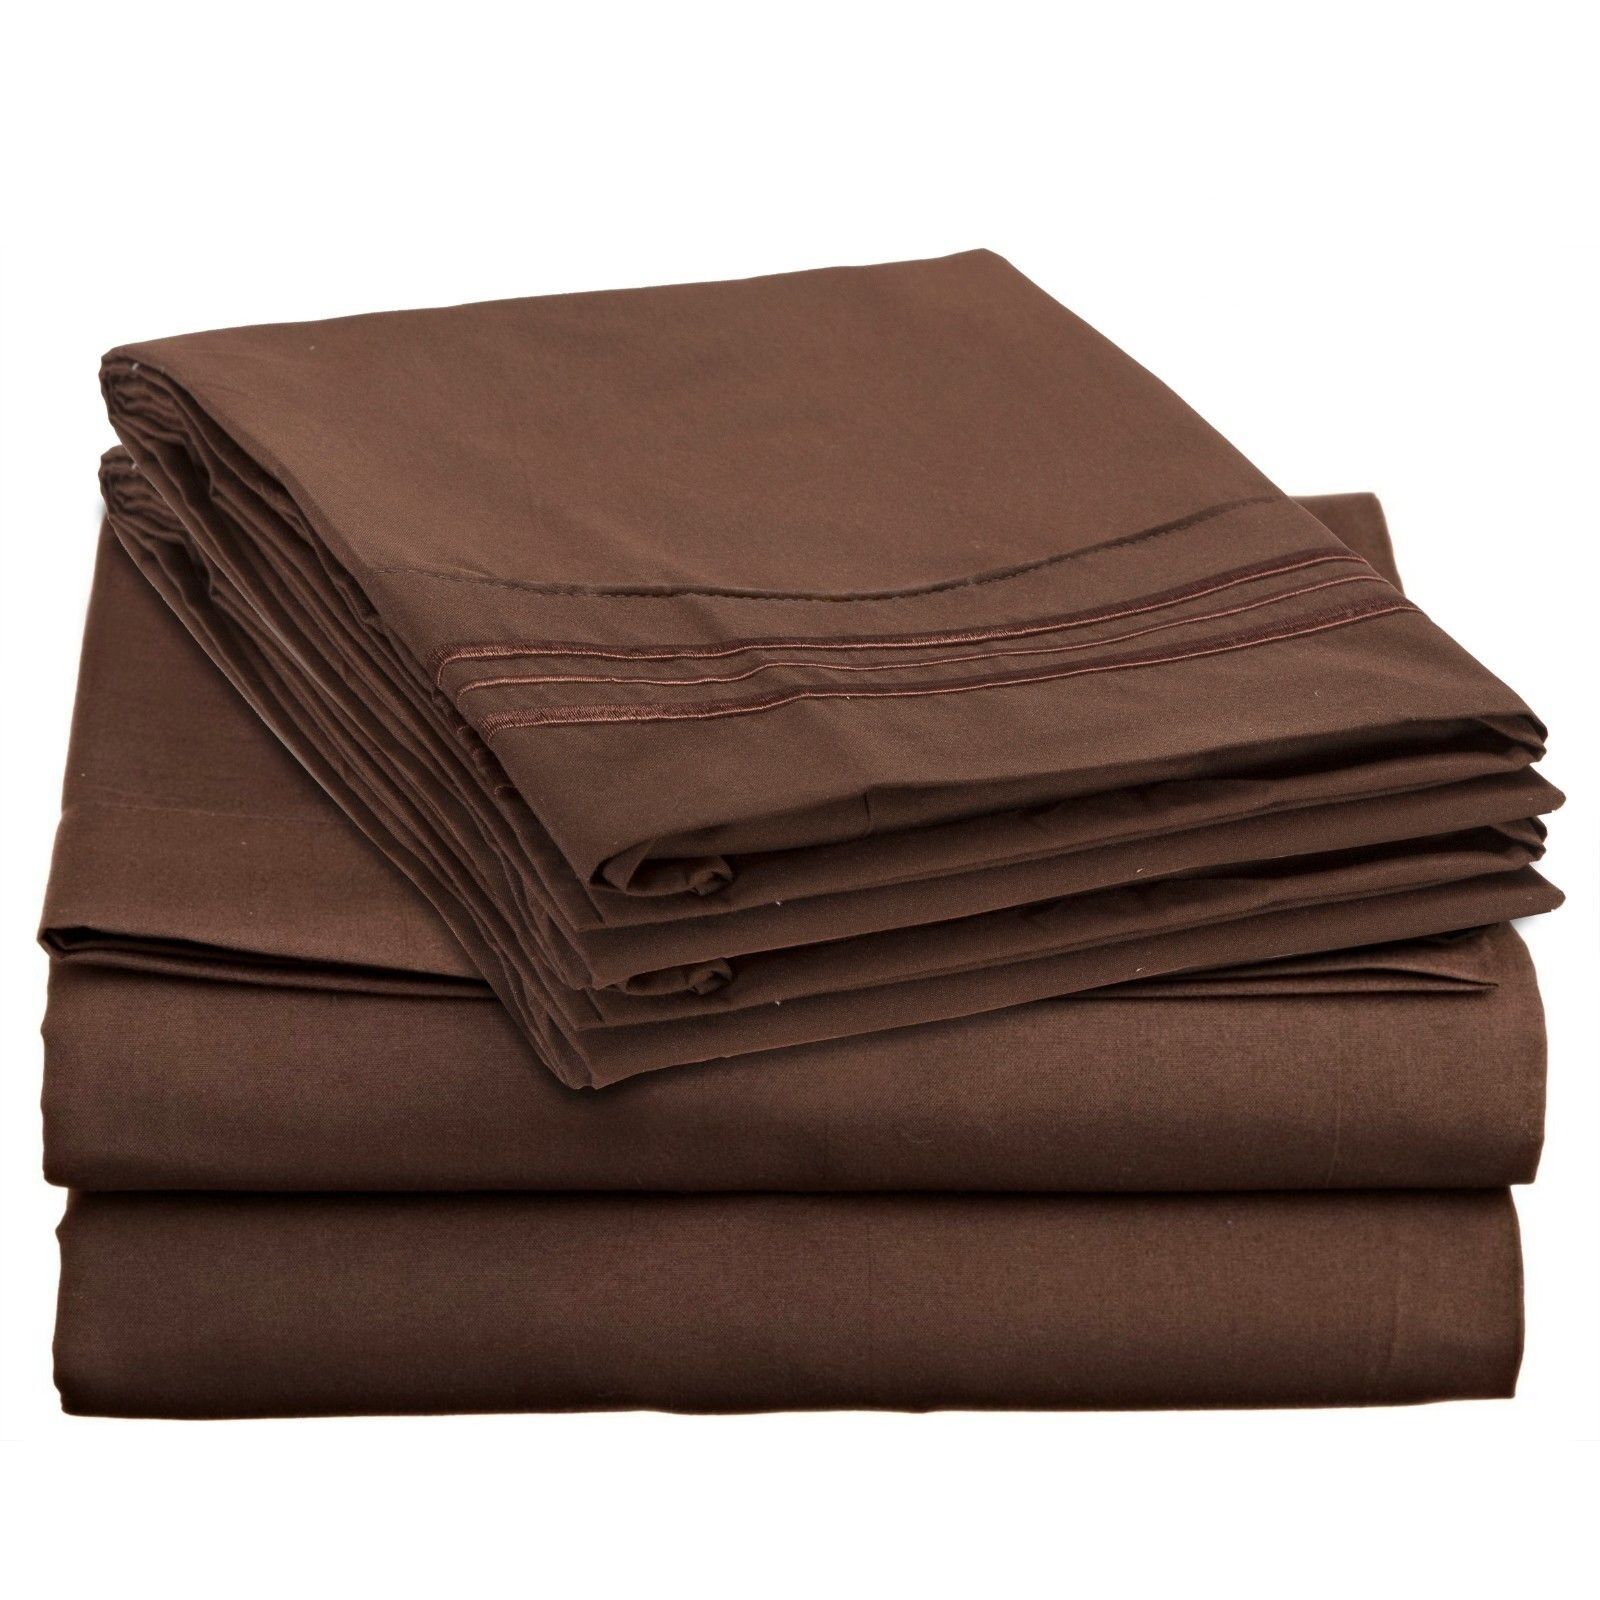 Bed Sheets - Deep Pocket Bed Sheets Set - Soft King Queen Twin Full California King - Queen / Brown